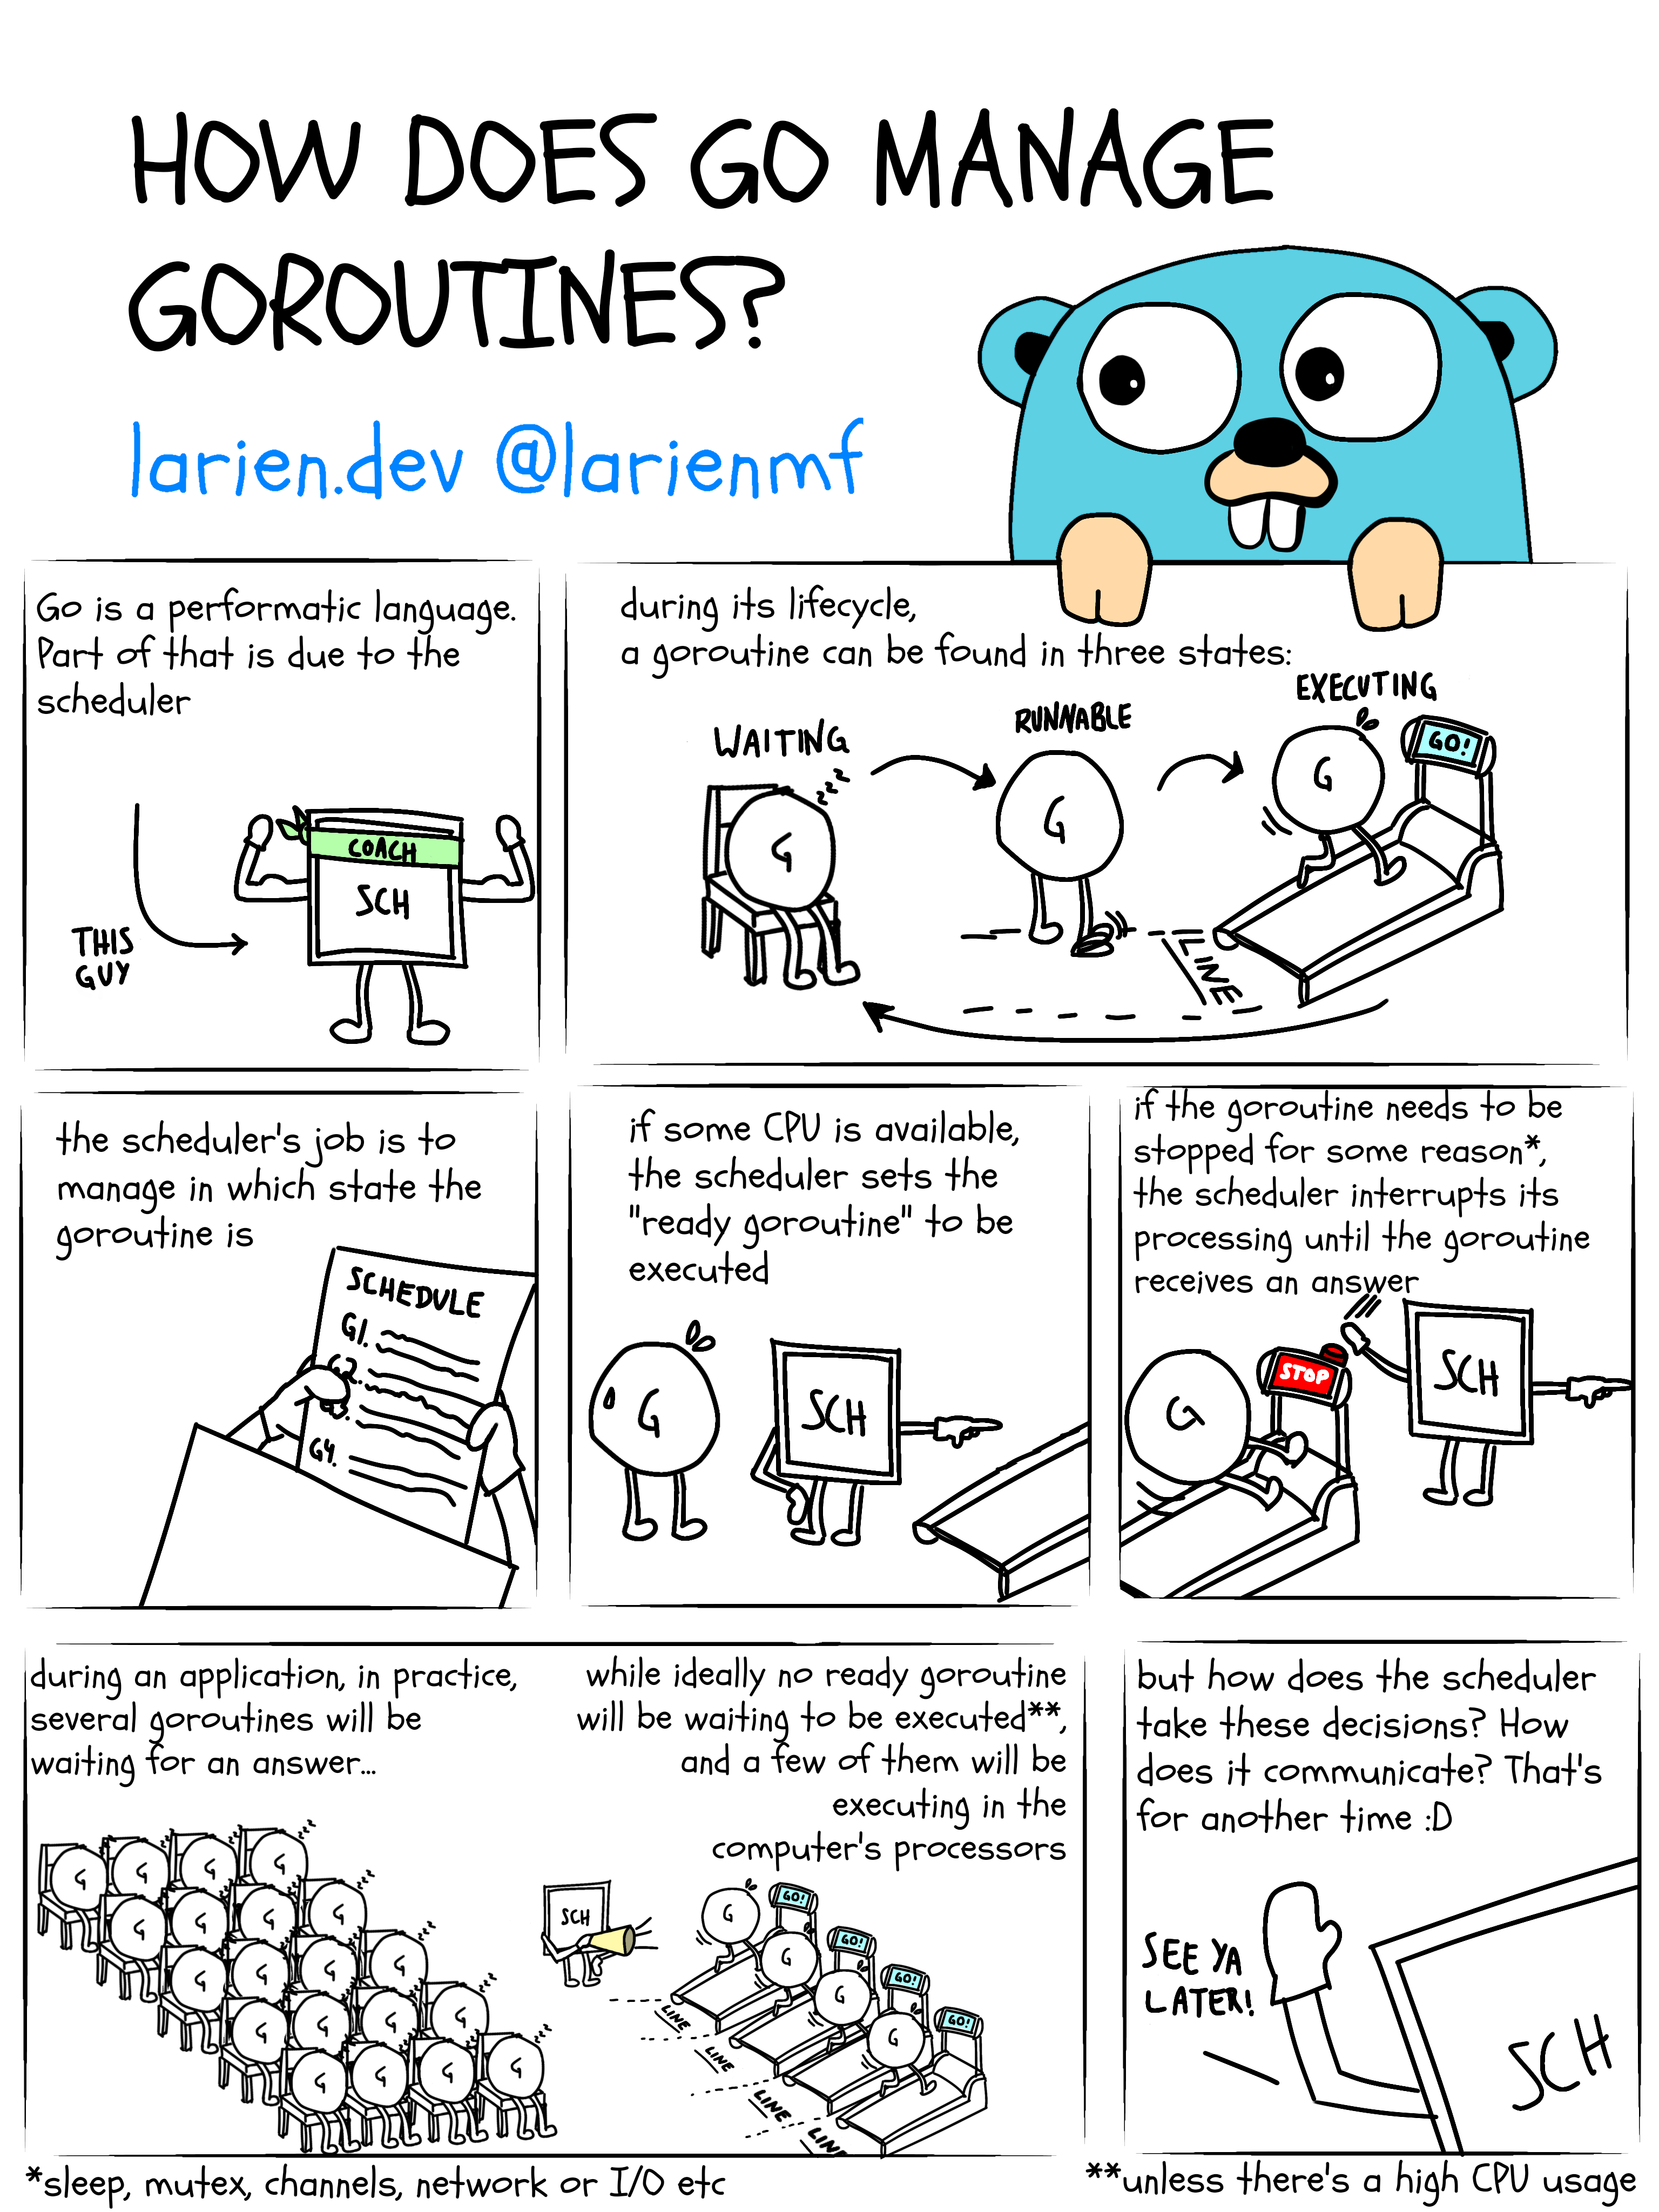 How does Go manage goroutines?